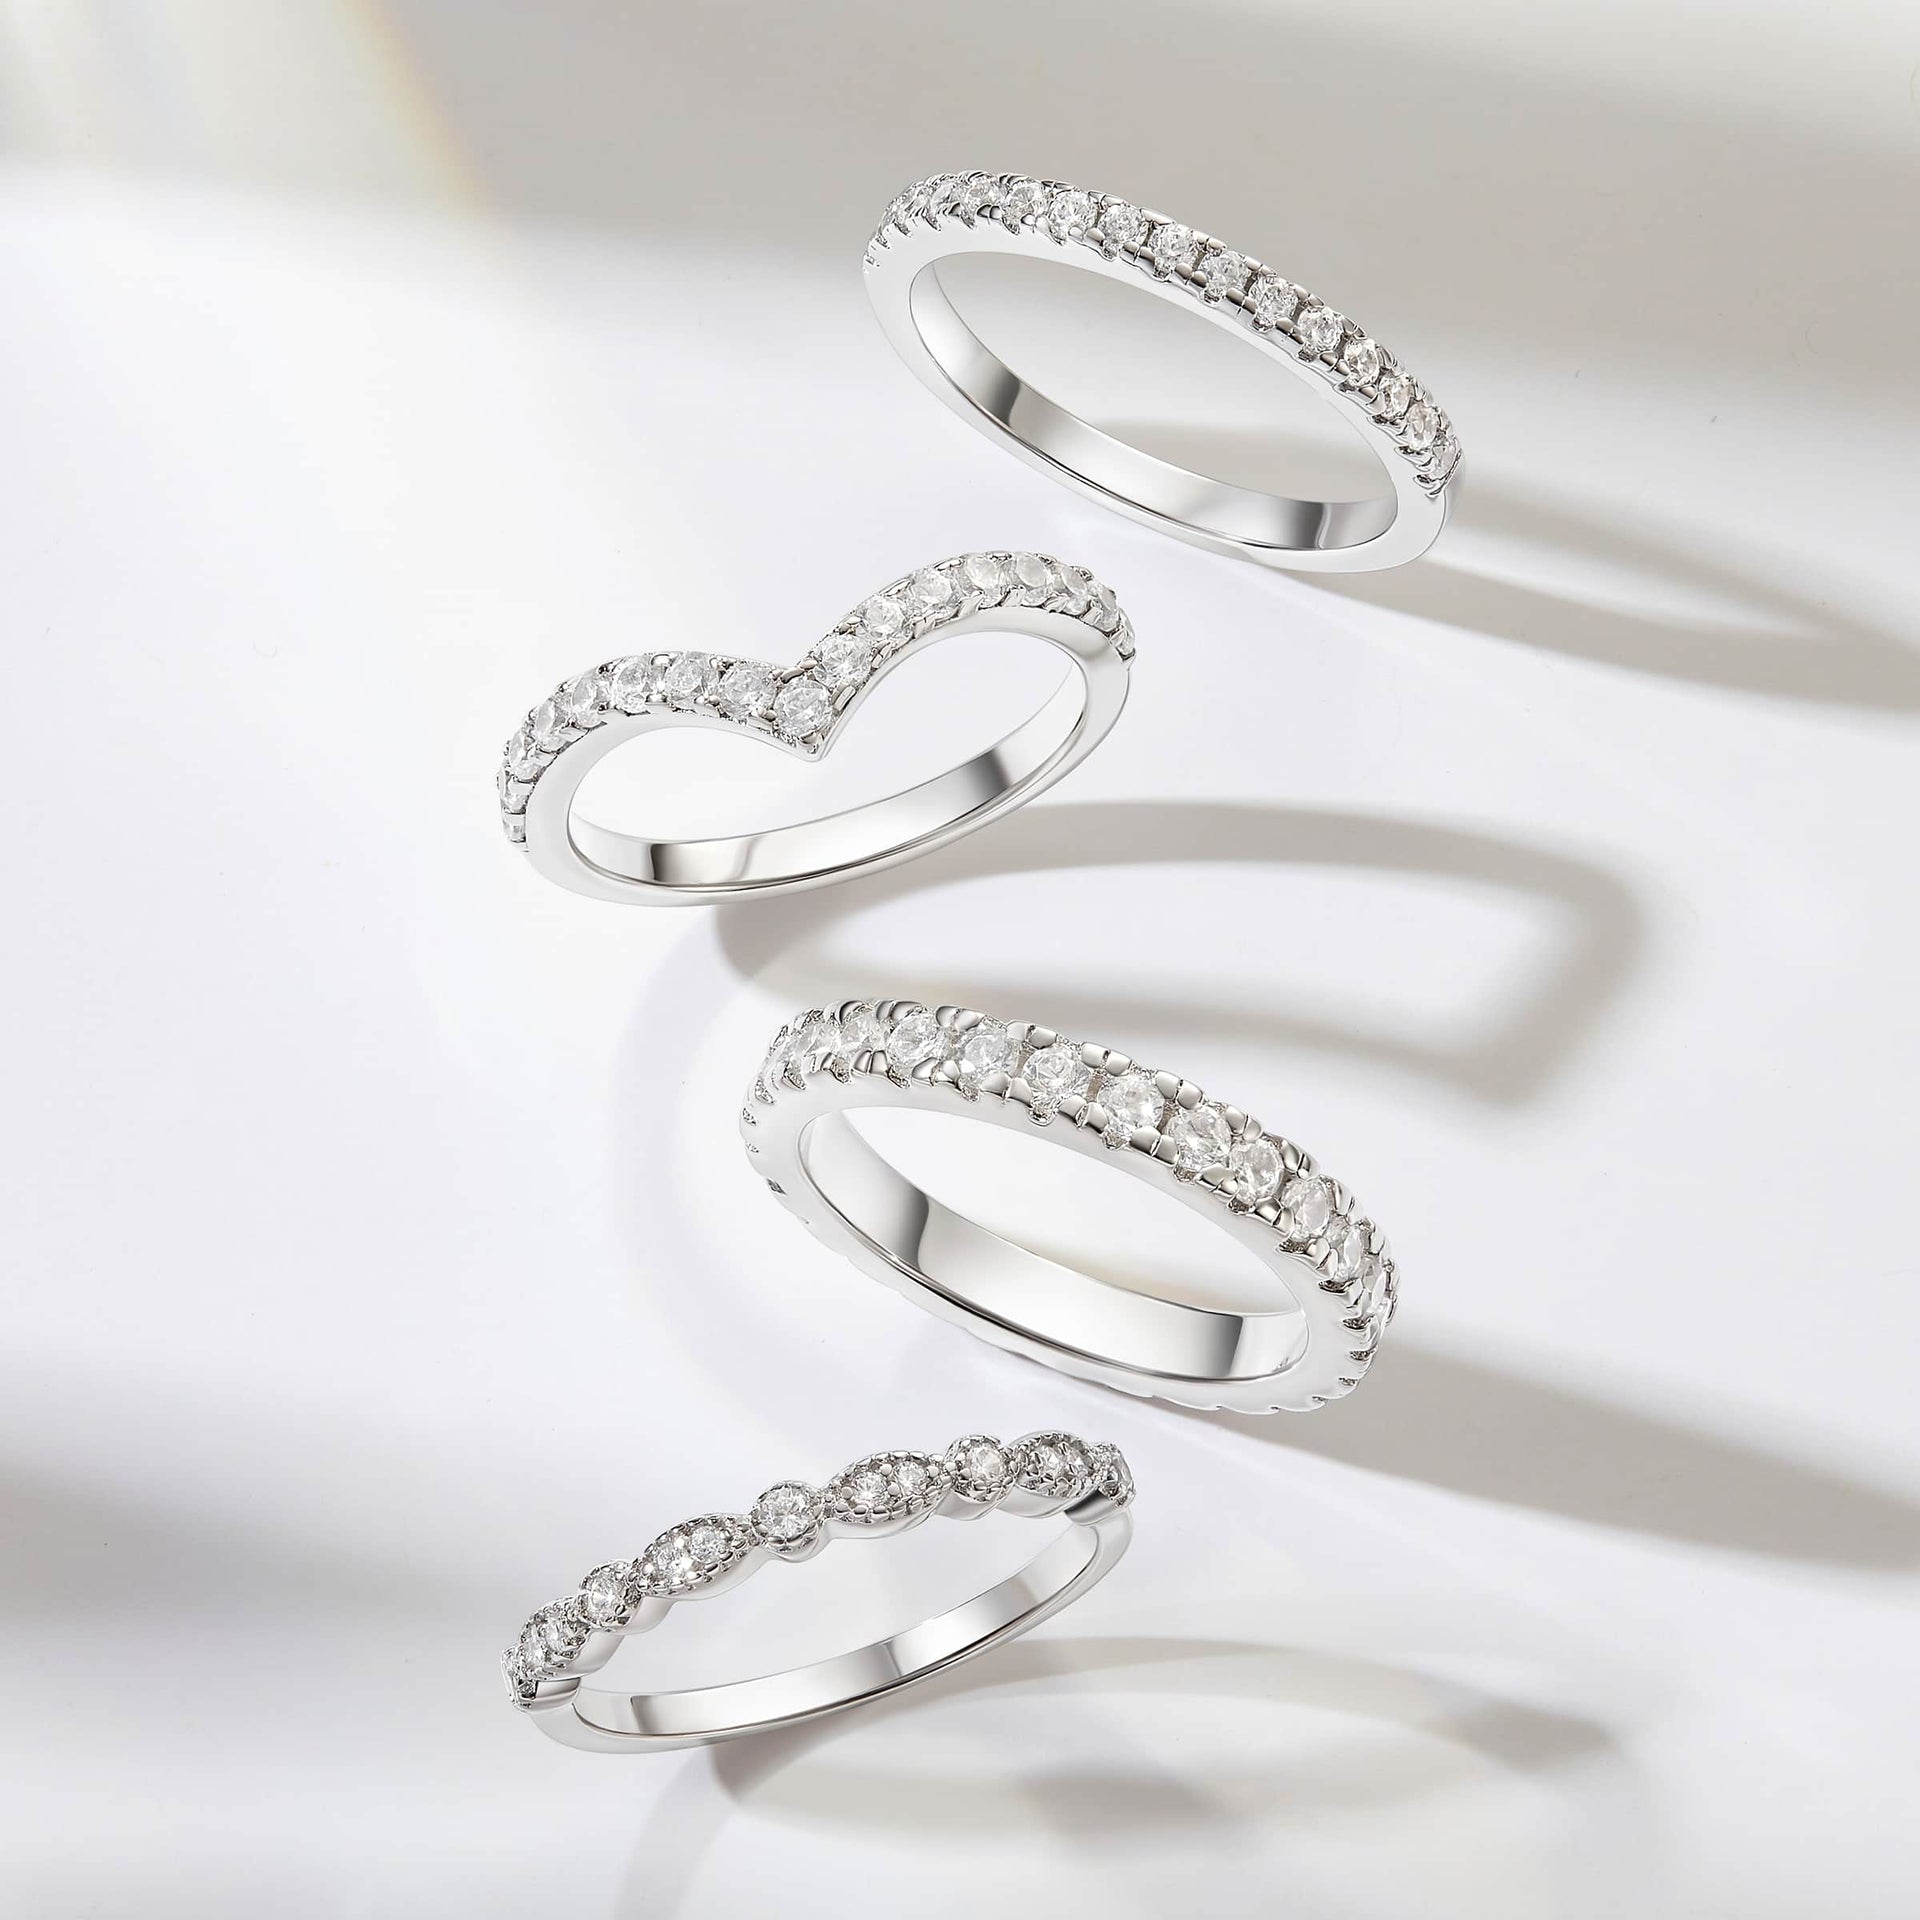 four silver eternity and half eternity wedding bands shown on gray/white background